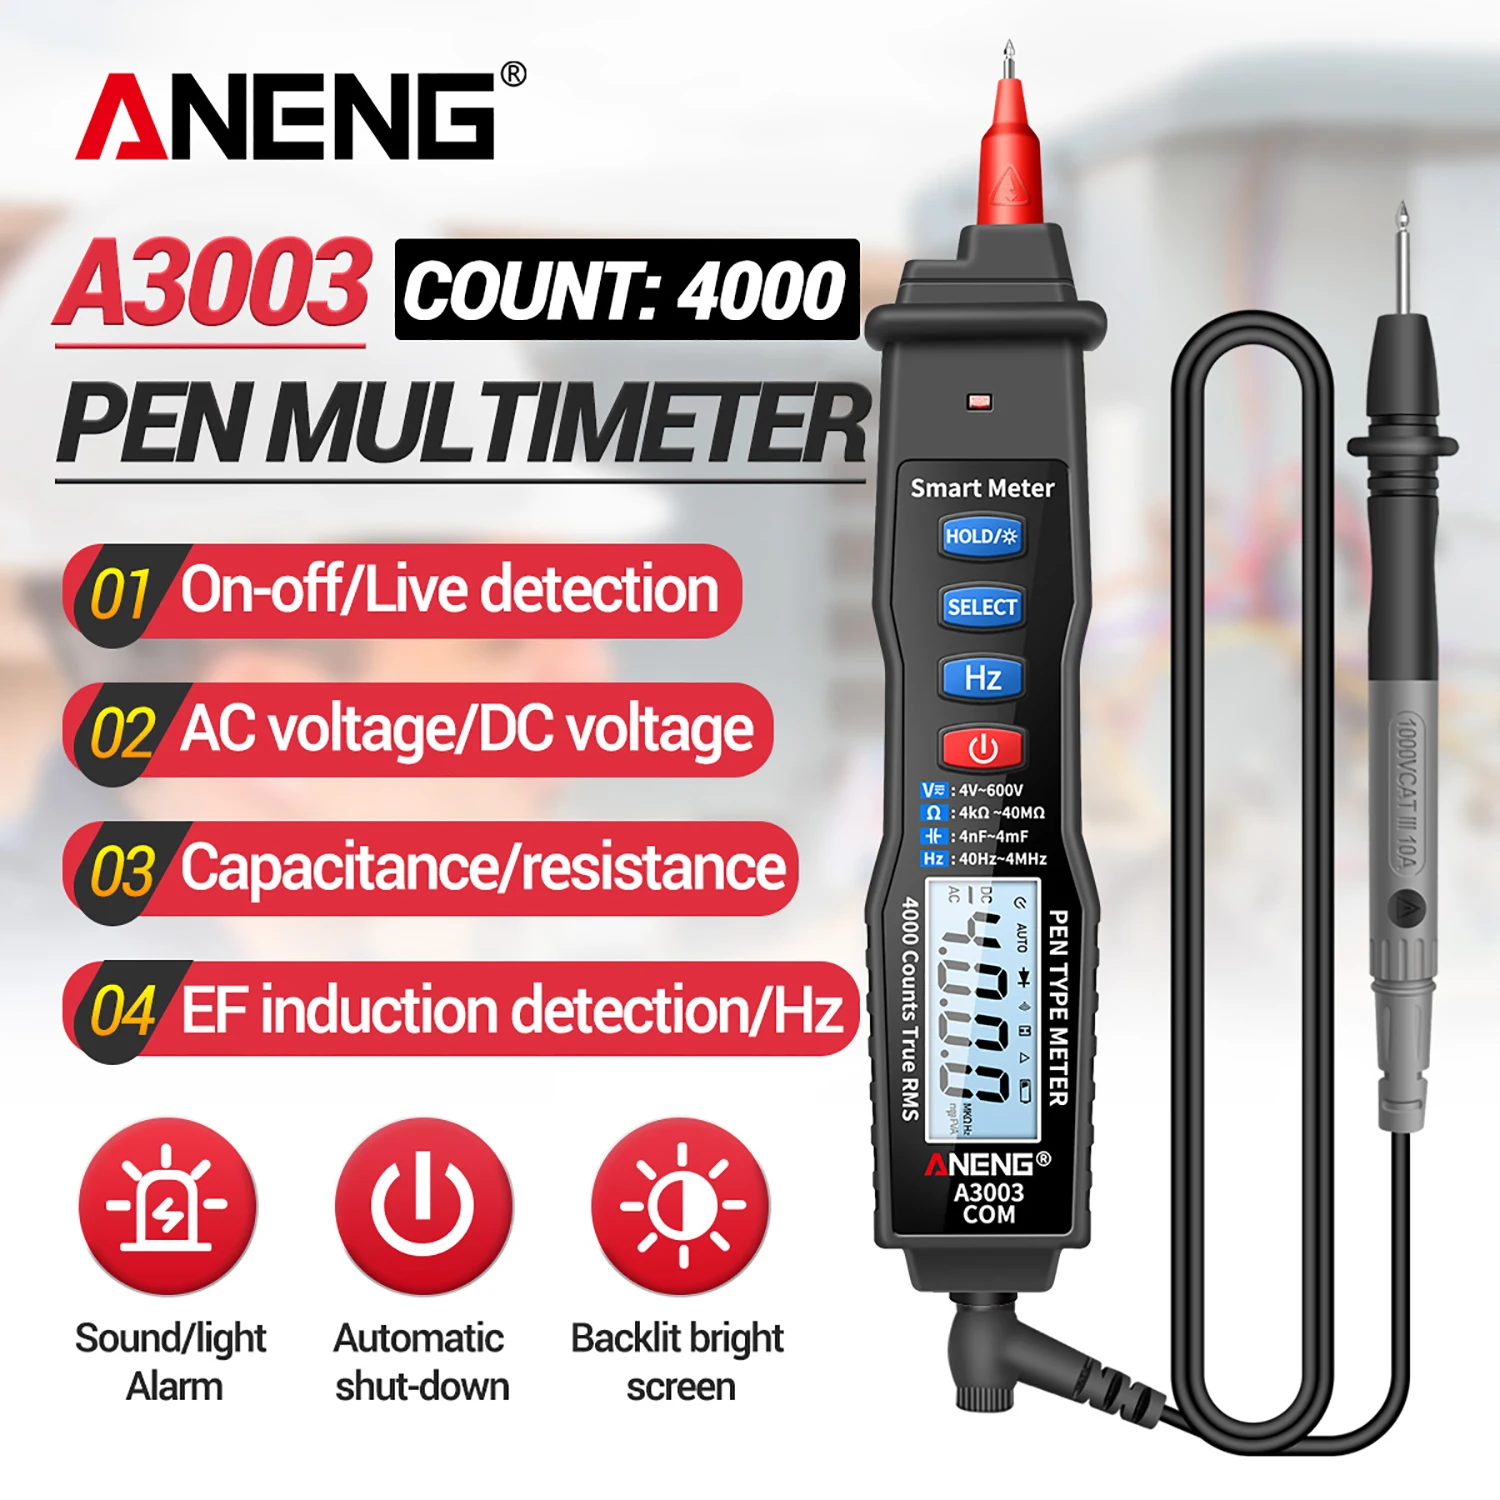 ANENG A3003 Digital Multimeter Pen Type Meter 4000 Counts with Non Contact AC/DC 